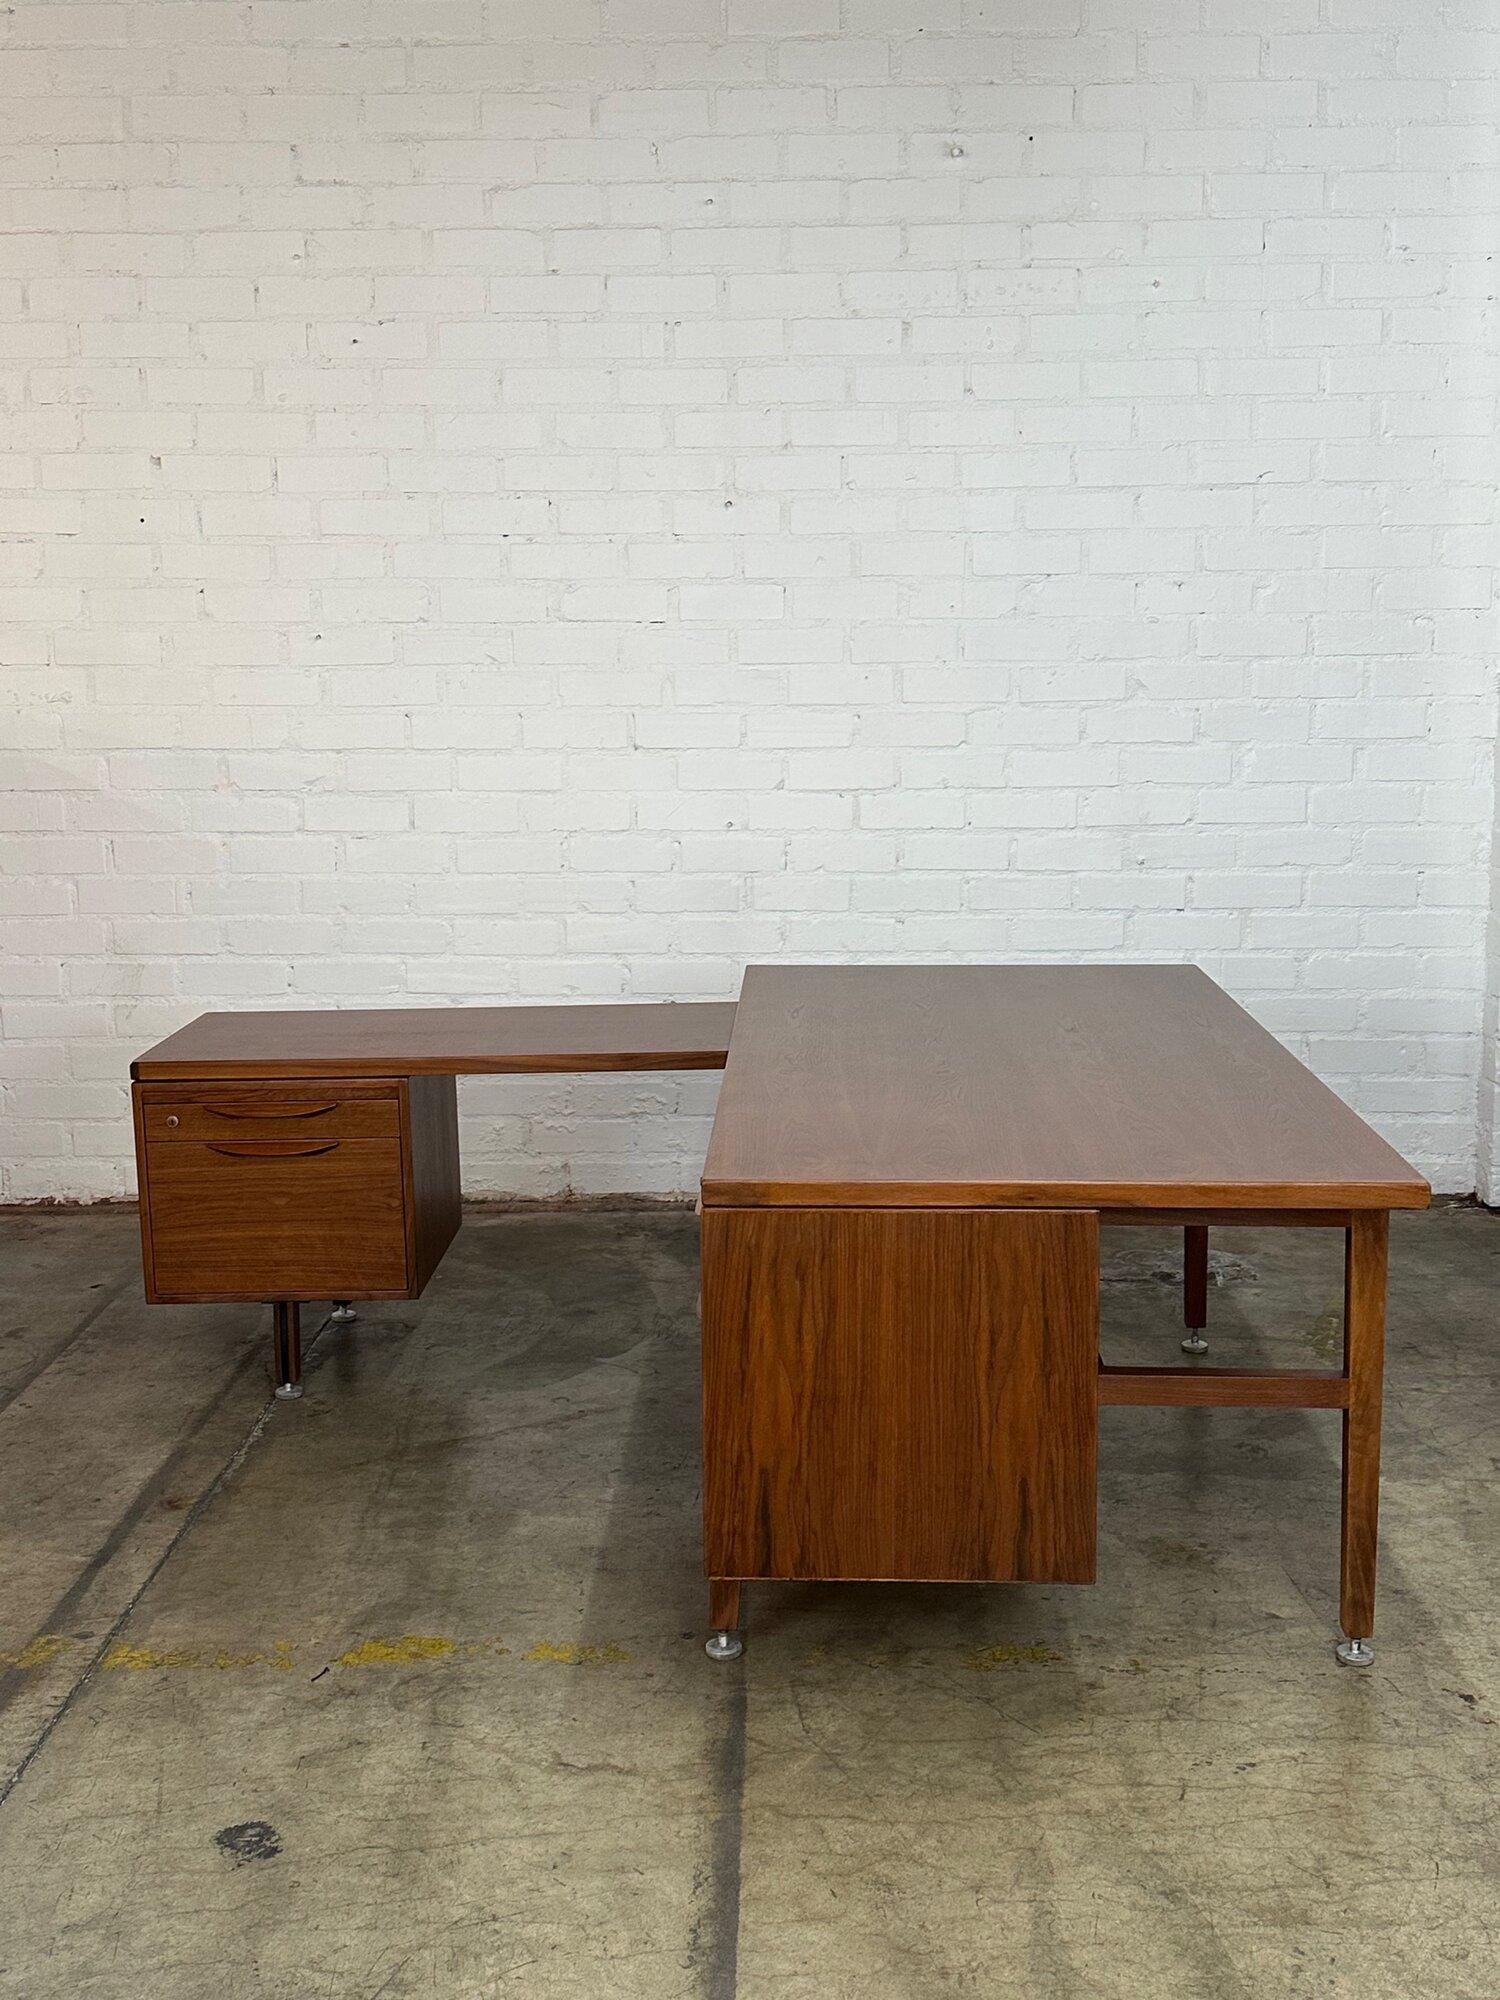 W68 D80 H29 Knee Clearance 23.5

Wide section W68 D36 H29

Side section W44 D20 H25 KC23.5

Fully restored two piece L shape desk by Jens Risom. Item has original hardware, levelers, and manufacture tag still in tact. Item is structurally